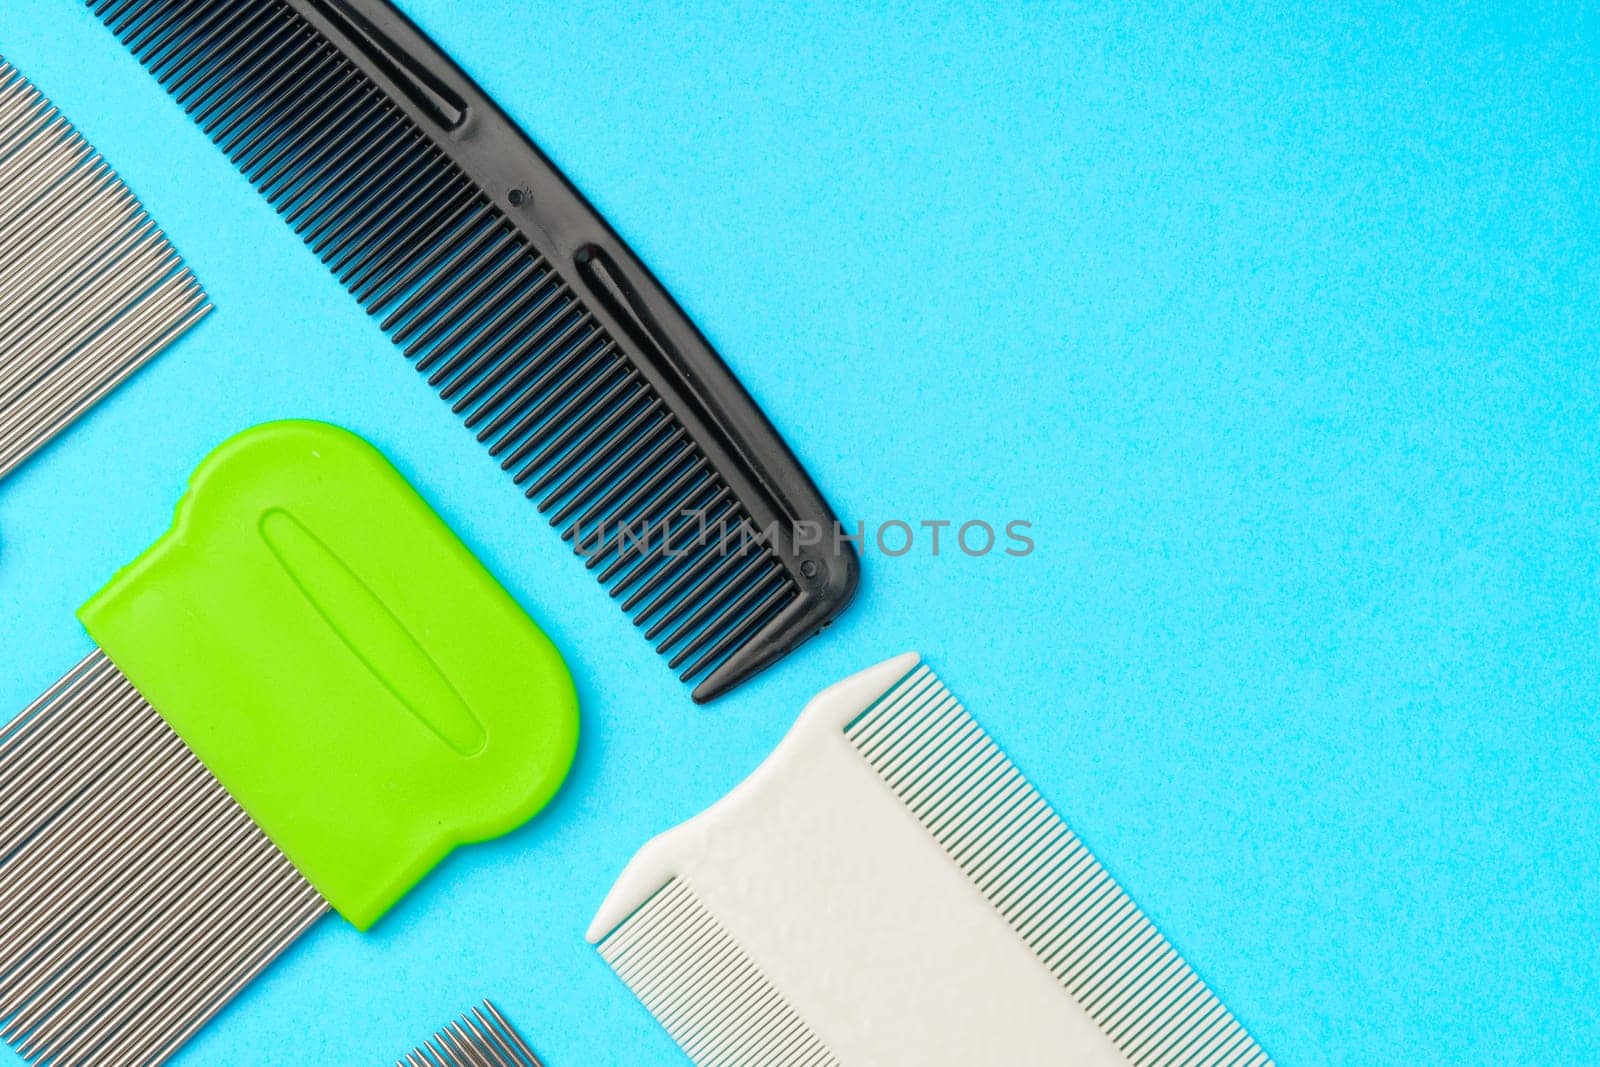 Comb for lice removing on blue background by Fabrikasimf